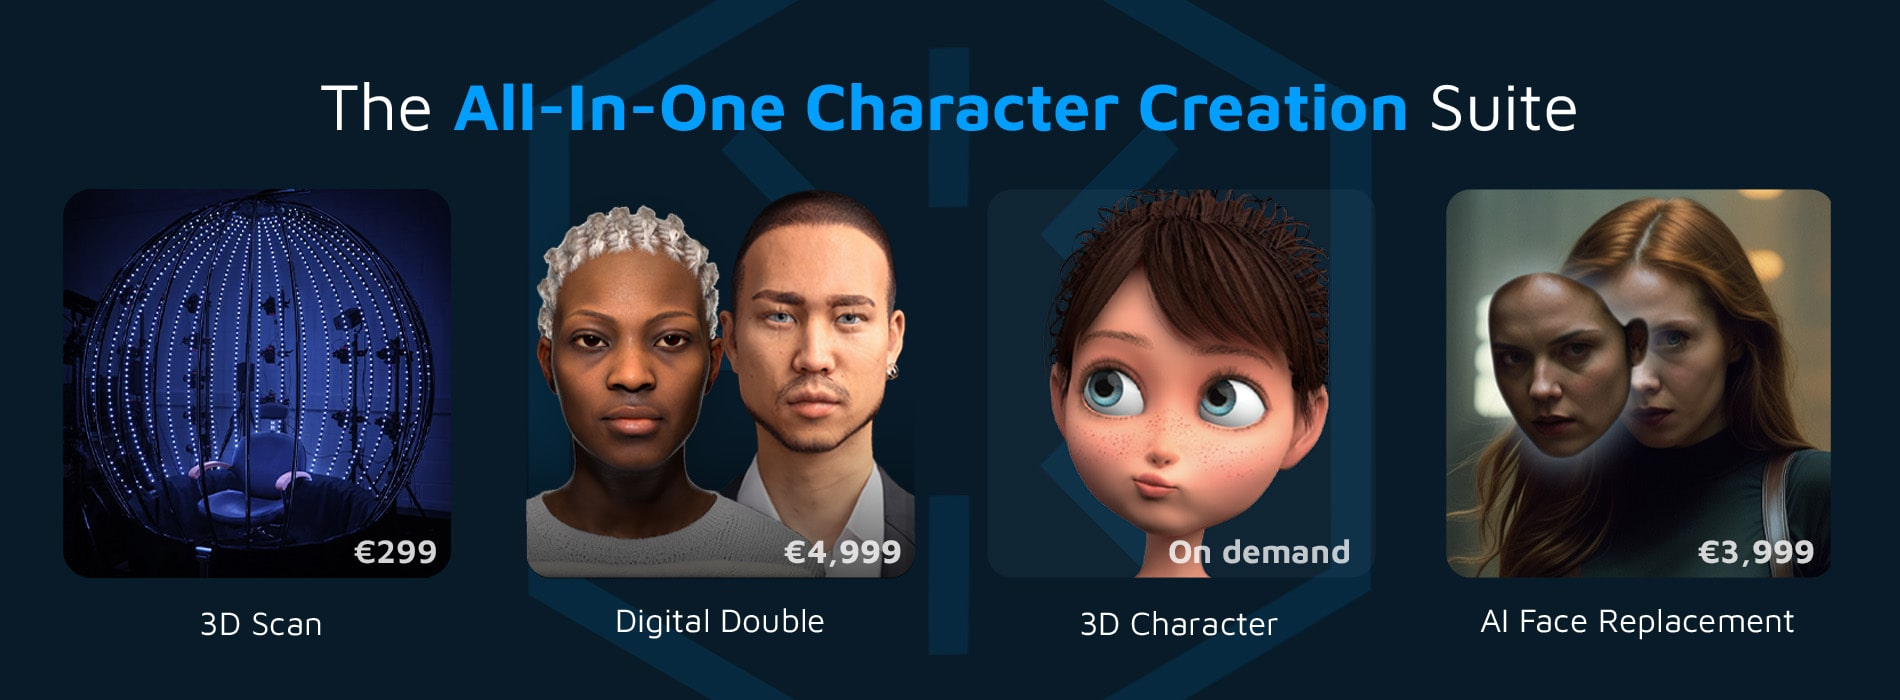 The all in one character creation suite, from 3D scanning to digital doubles and deepfake